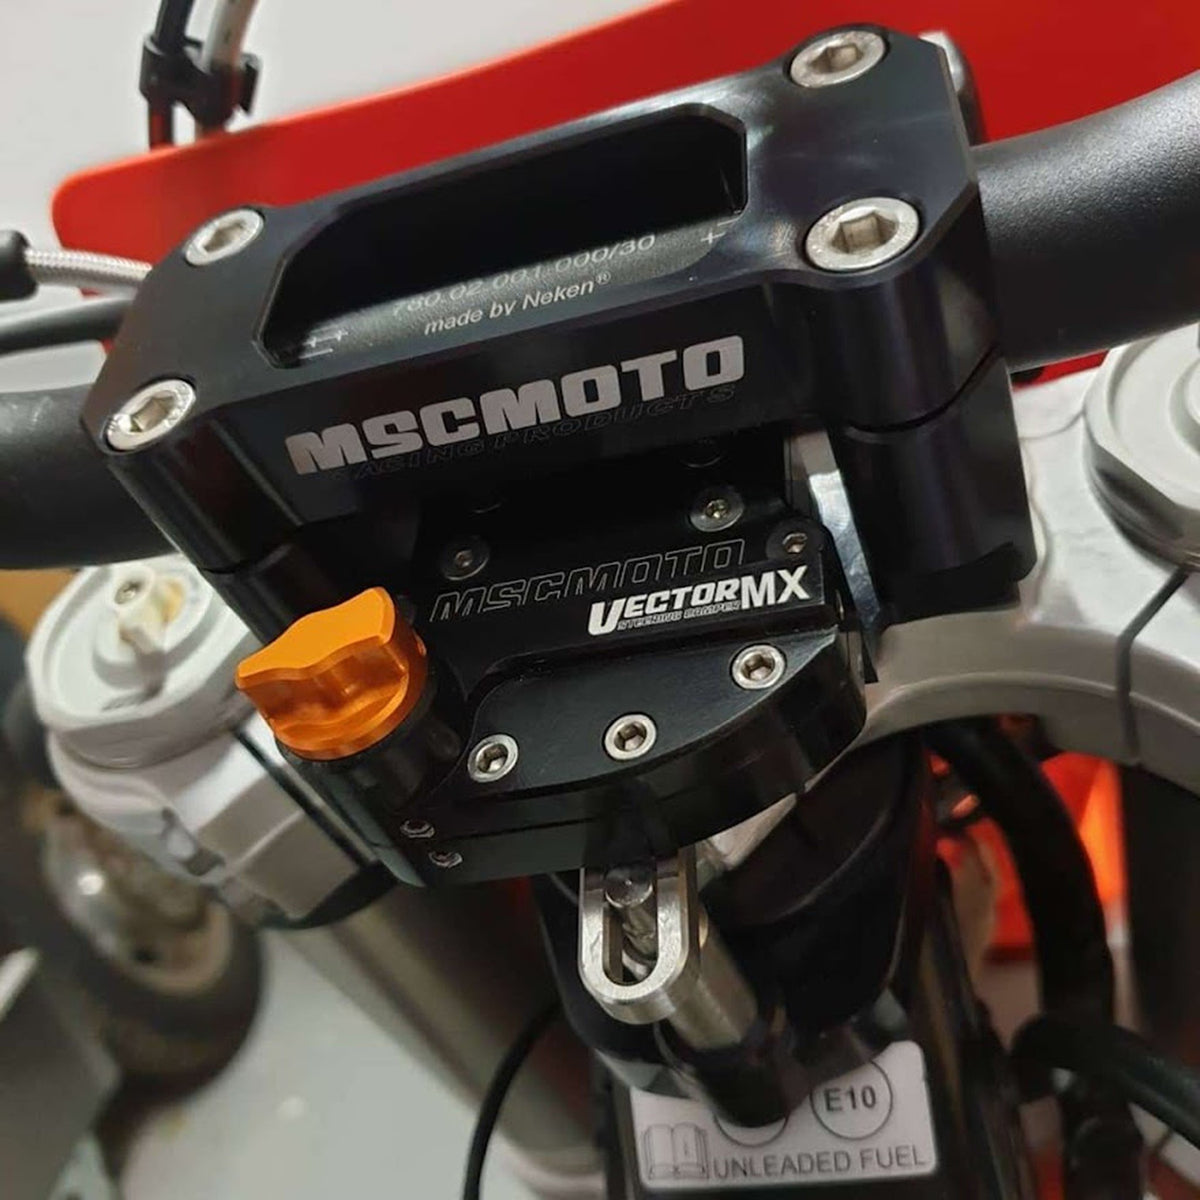 mscmotousa, VectorMX Steering Damper Kit &quot;Down Under&quot; Mount (VEC0008) - SHERCO SEF-F, VEC0008, sherco, sherco-2018-450-sef-f-esi7035460, vectormx, , Imported and distributed in North &amp; South America by Lindeco Genuine Powersports.